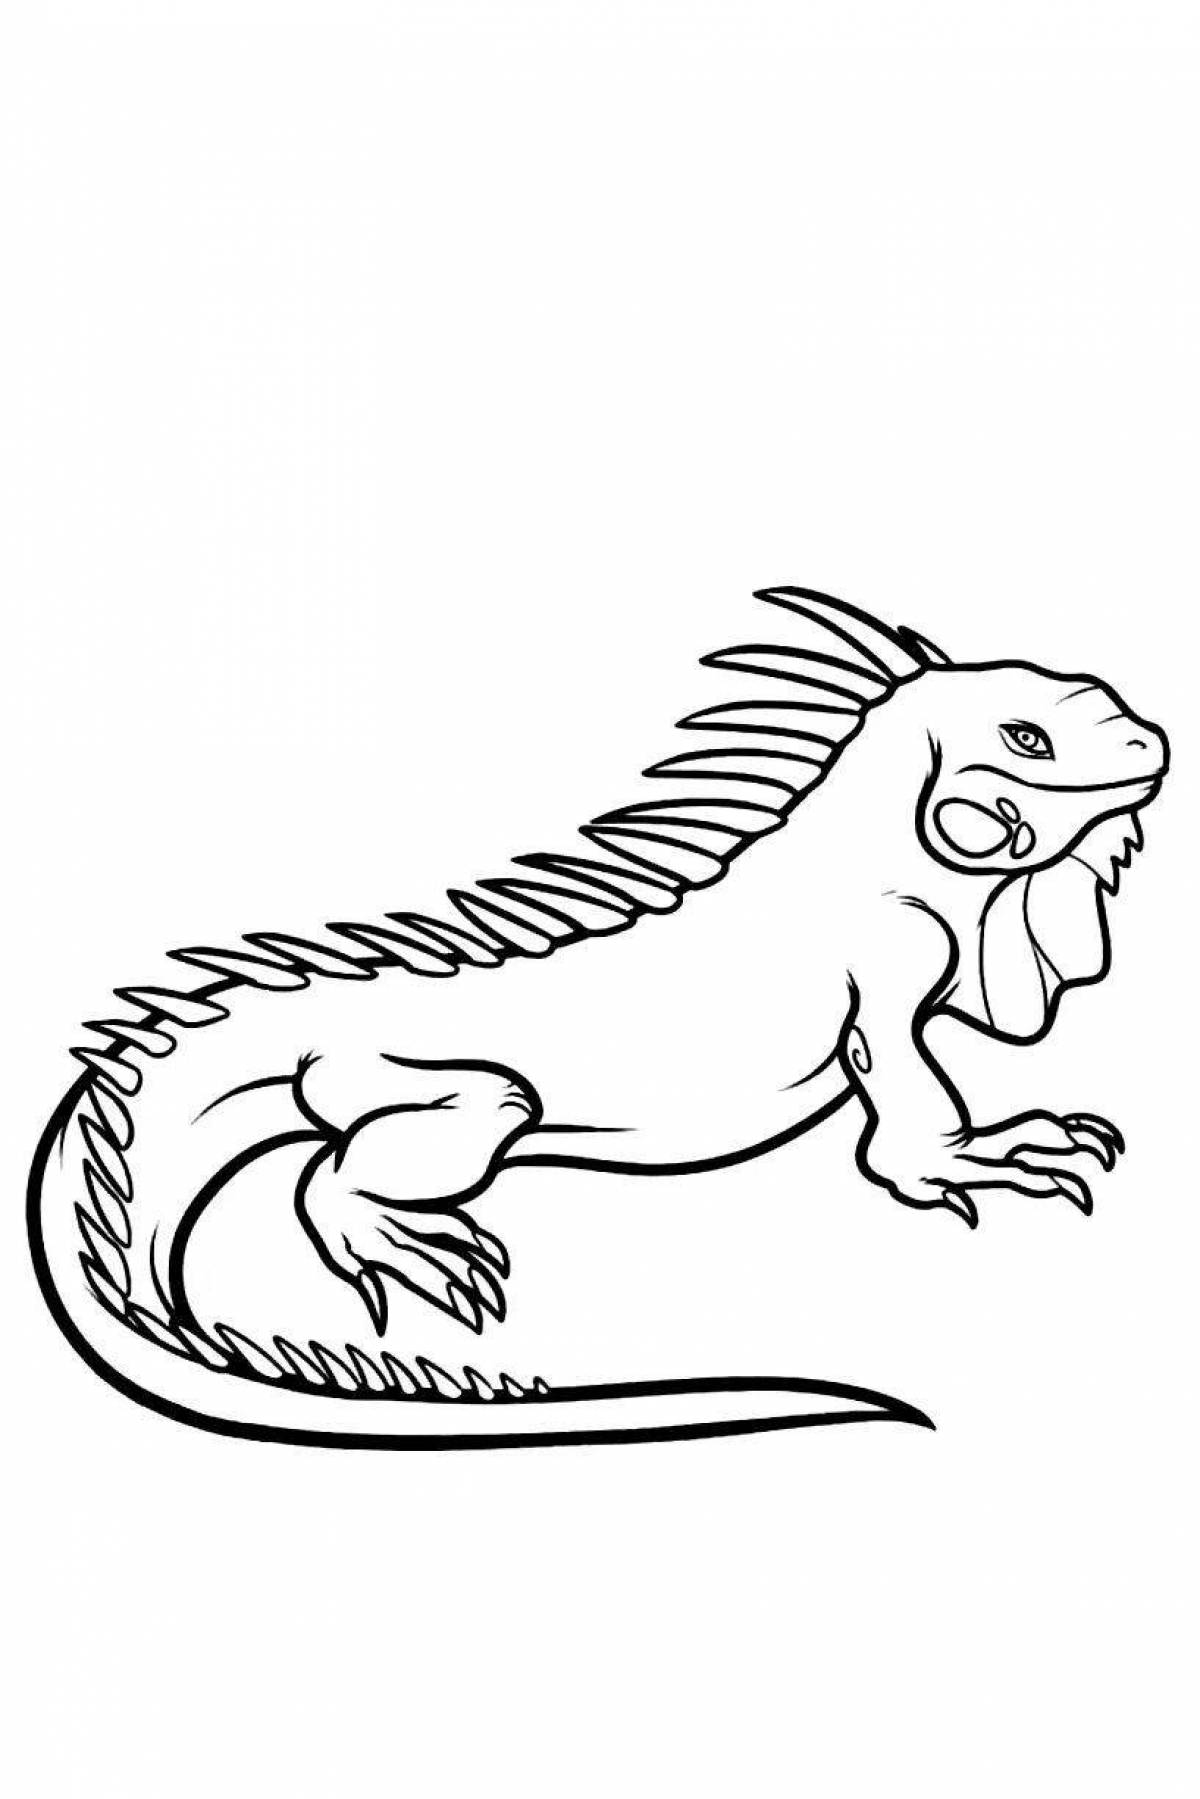 Bright iguana coloring book for kids